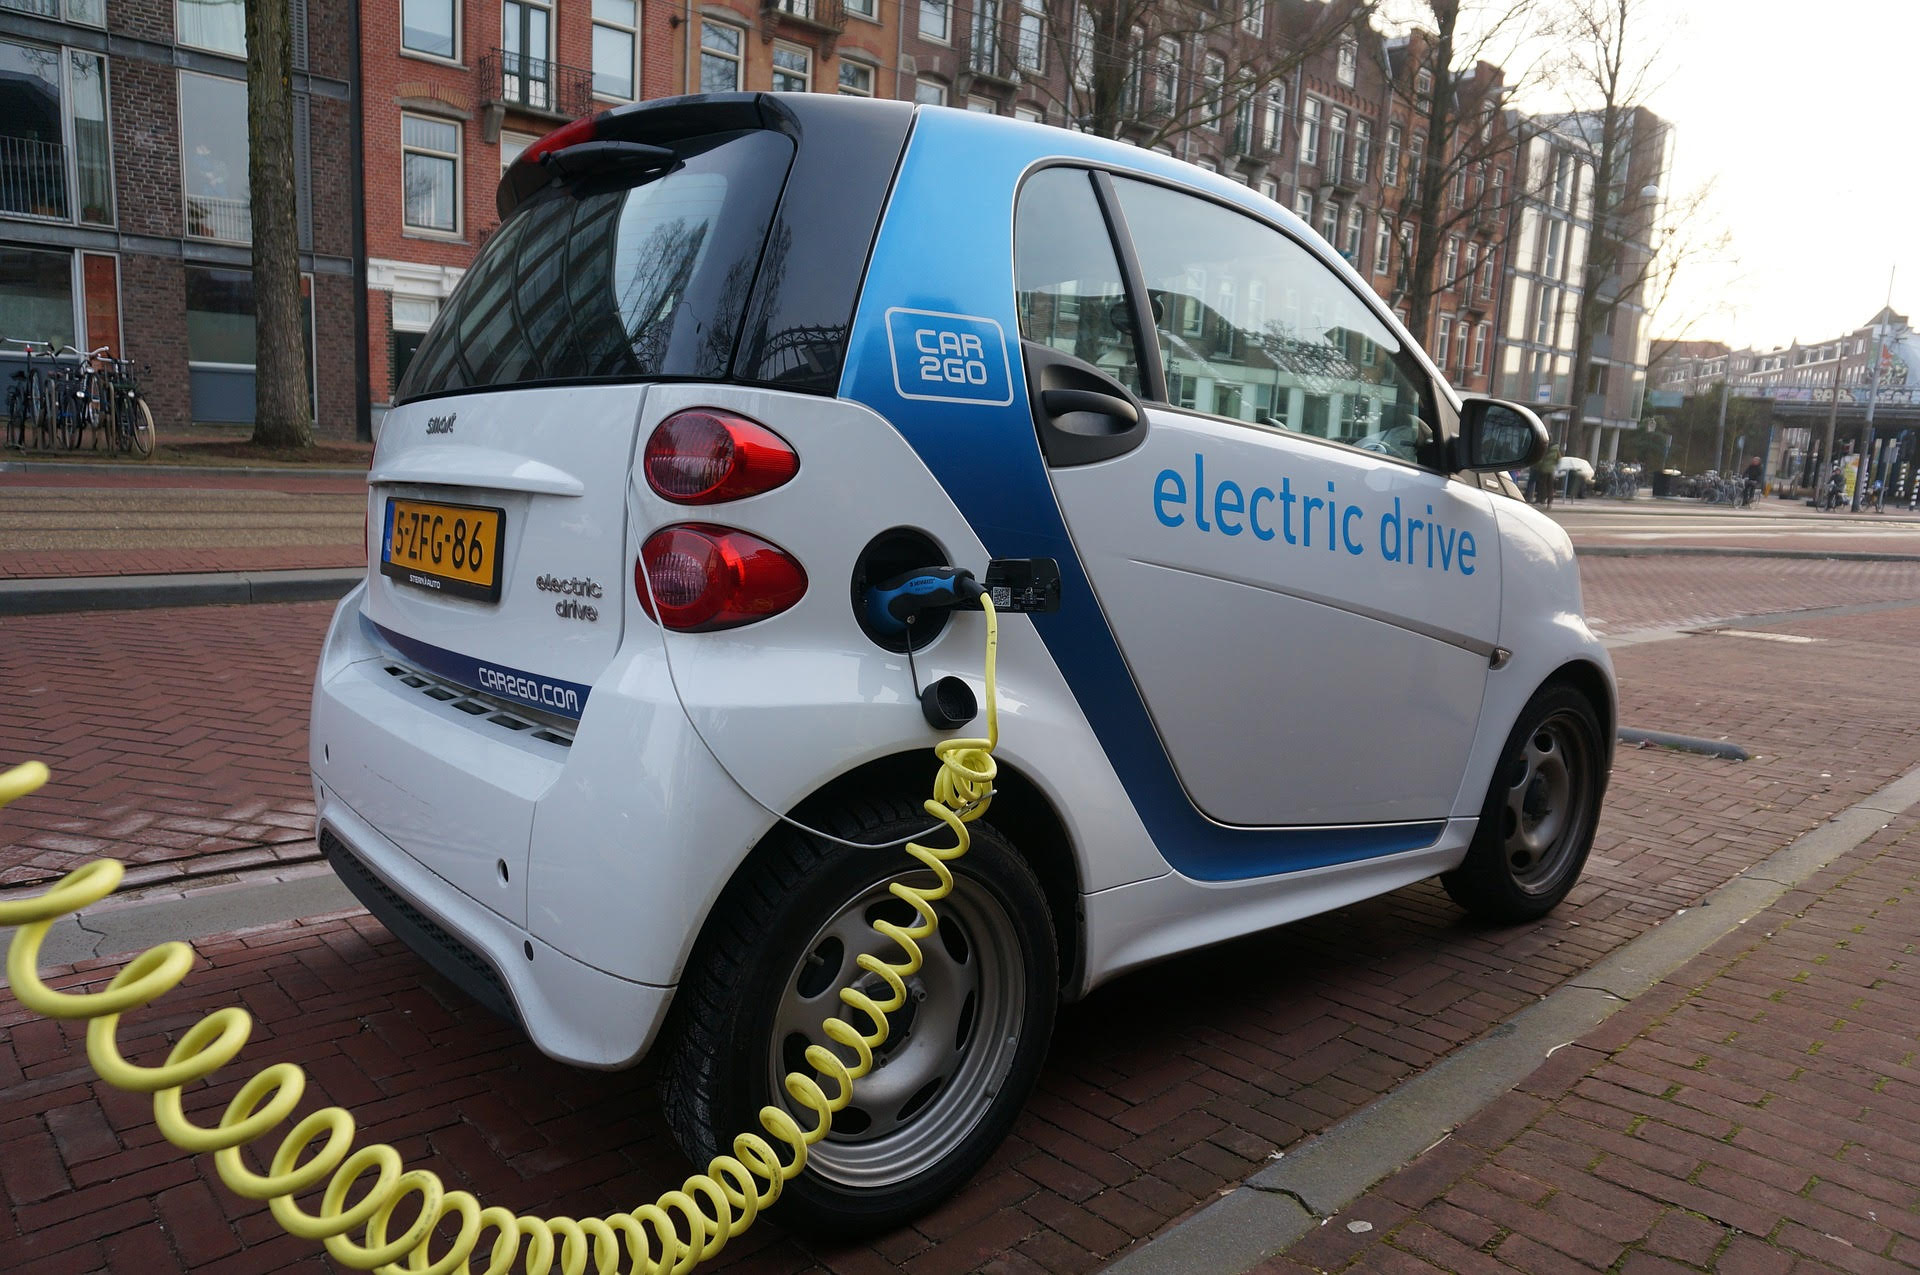 Do Electric Cars Need Less Maintenance?